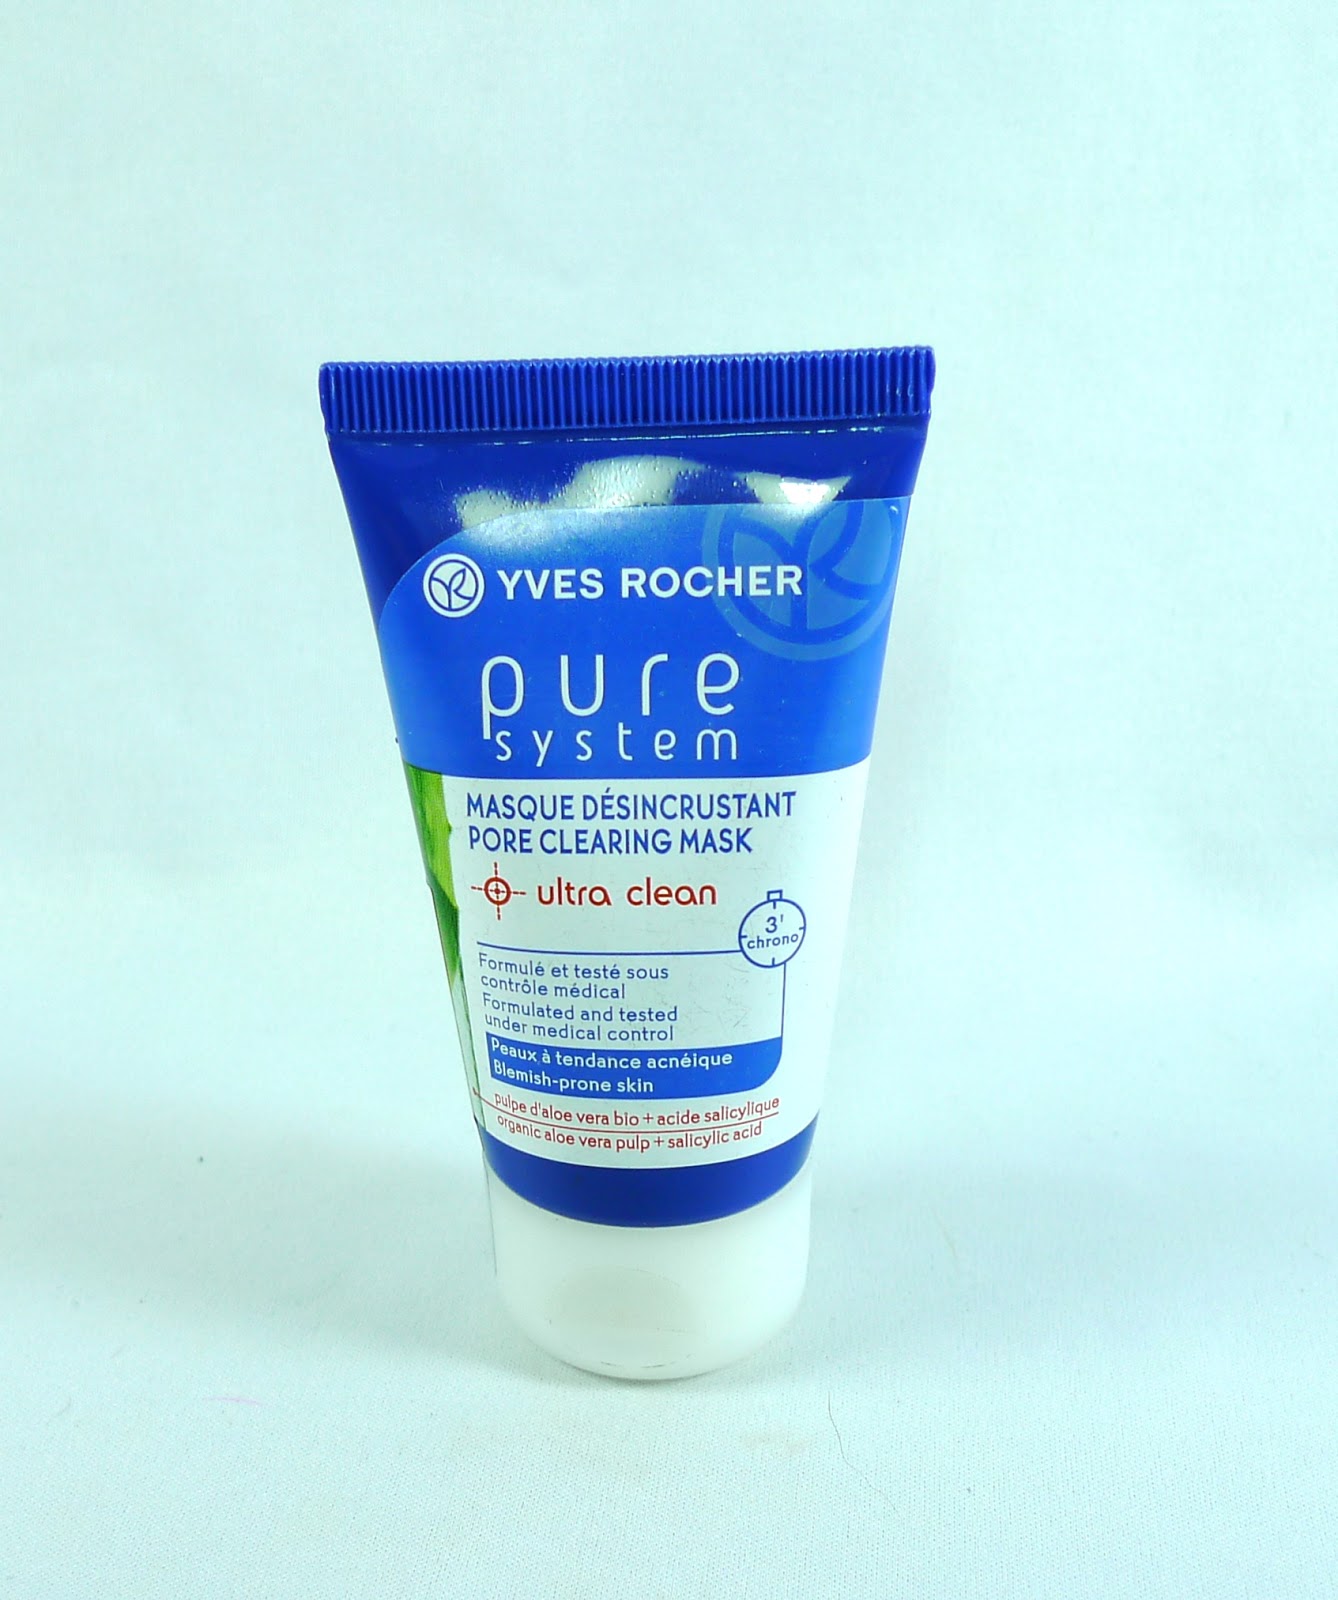 Collective Review Yves Rocher Pure System Line The Beauty Junkee